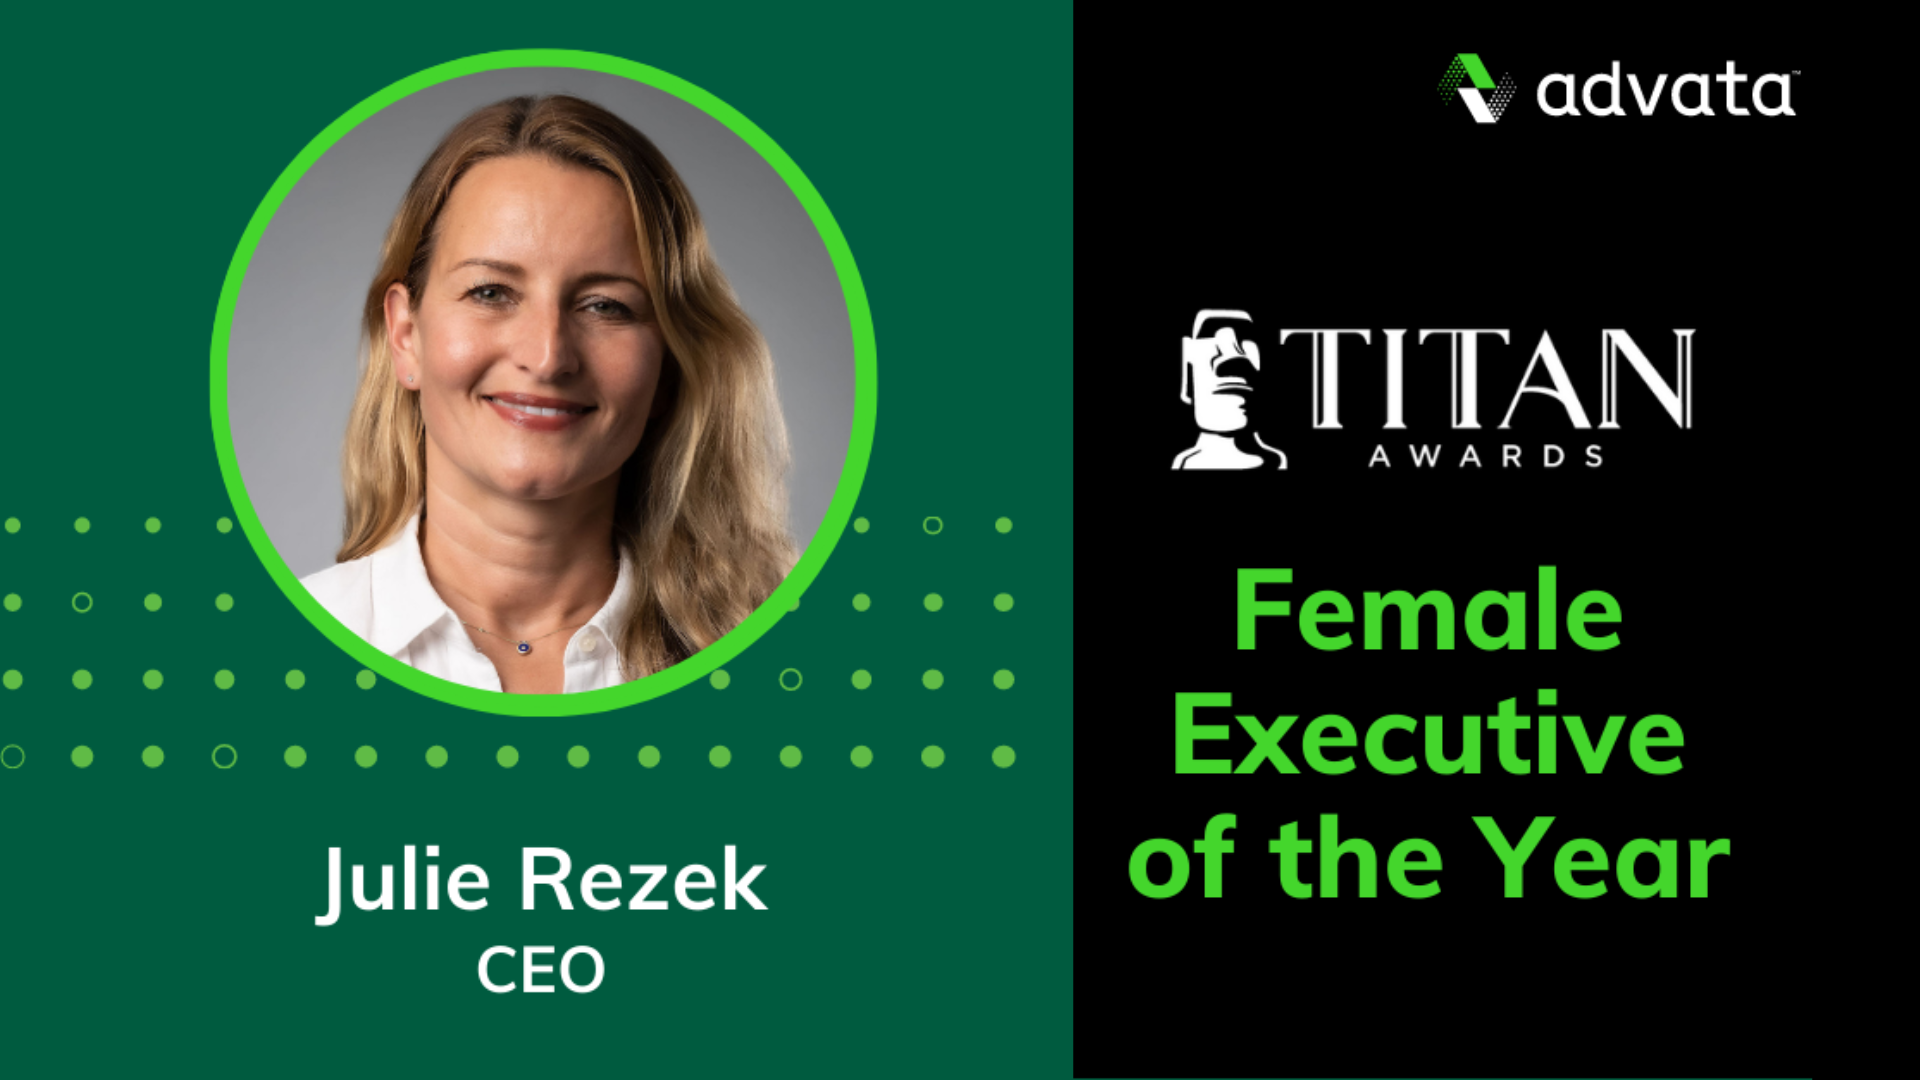 Advata’s Julie Rezek Earns Female Executive of the Year Honors in 2022 TITAN Women in Business Awards